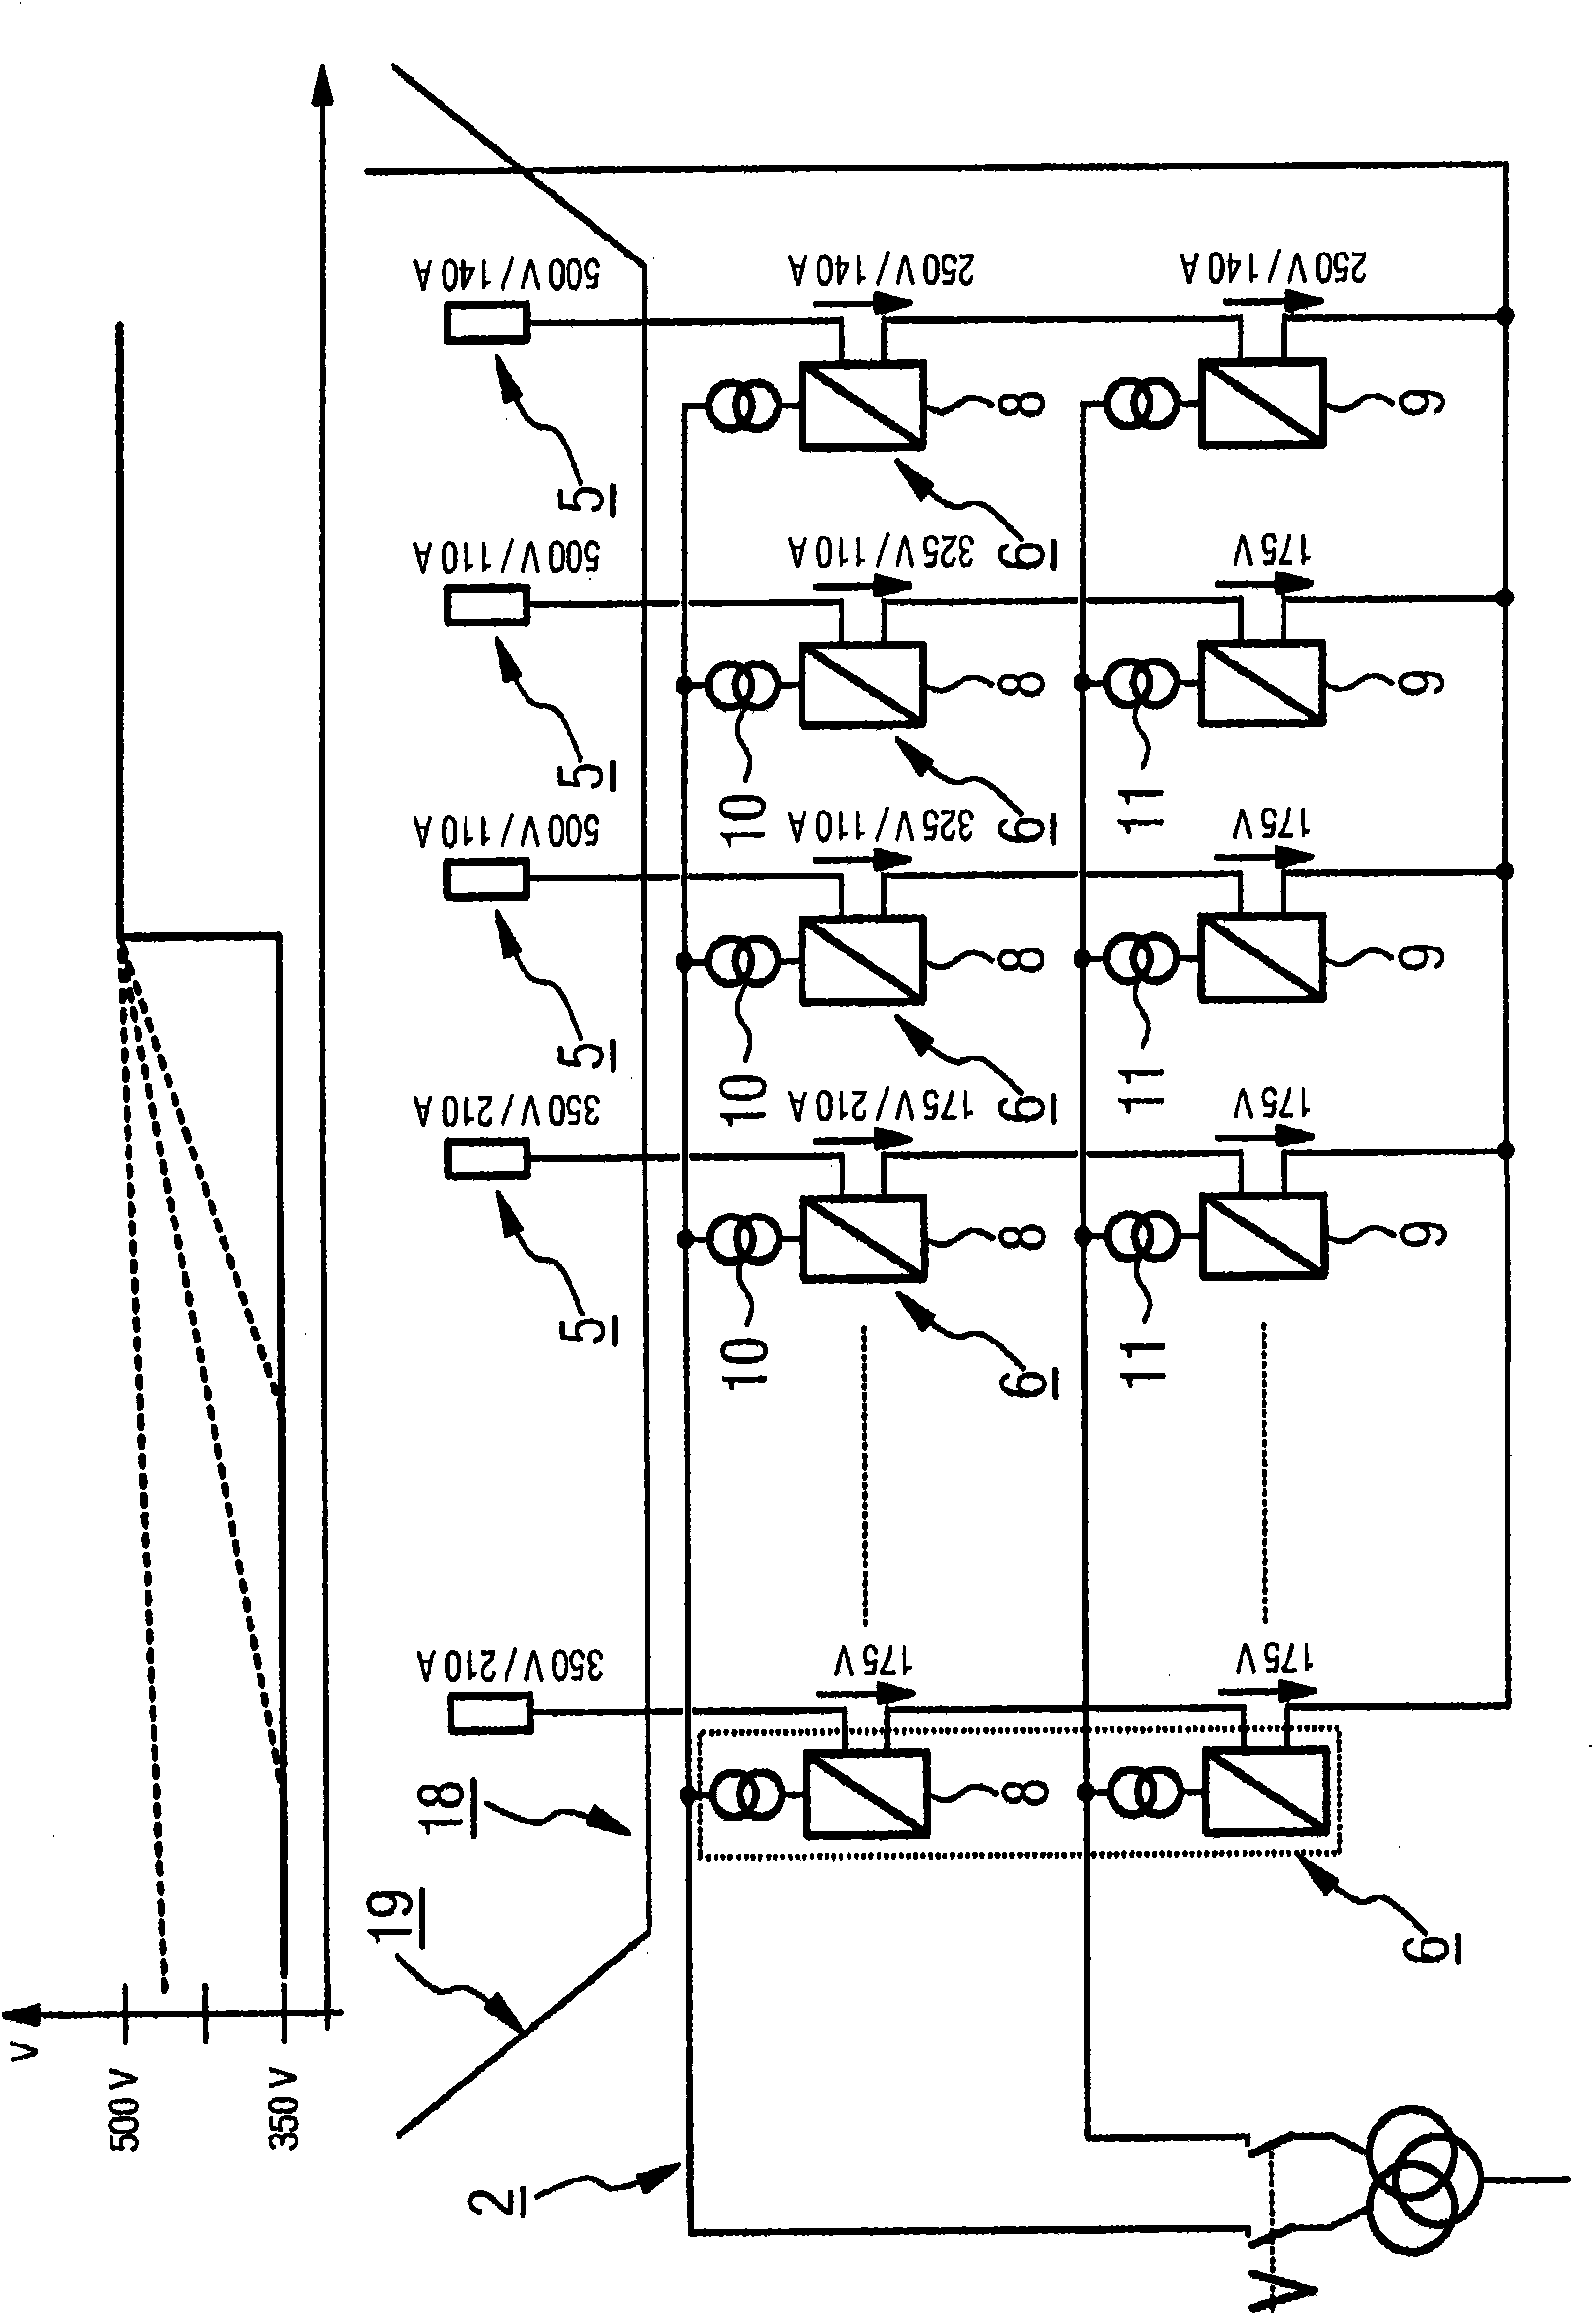 Power control device of a power network of an electrochemical coating facility